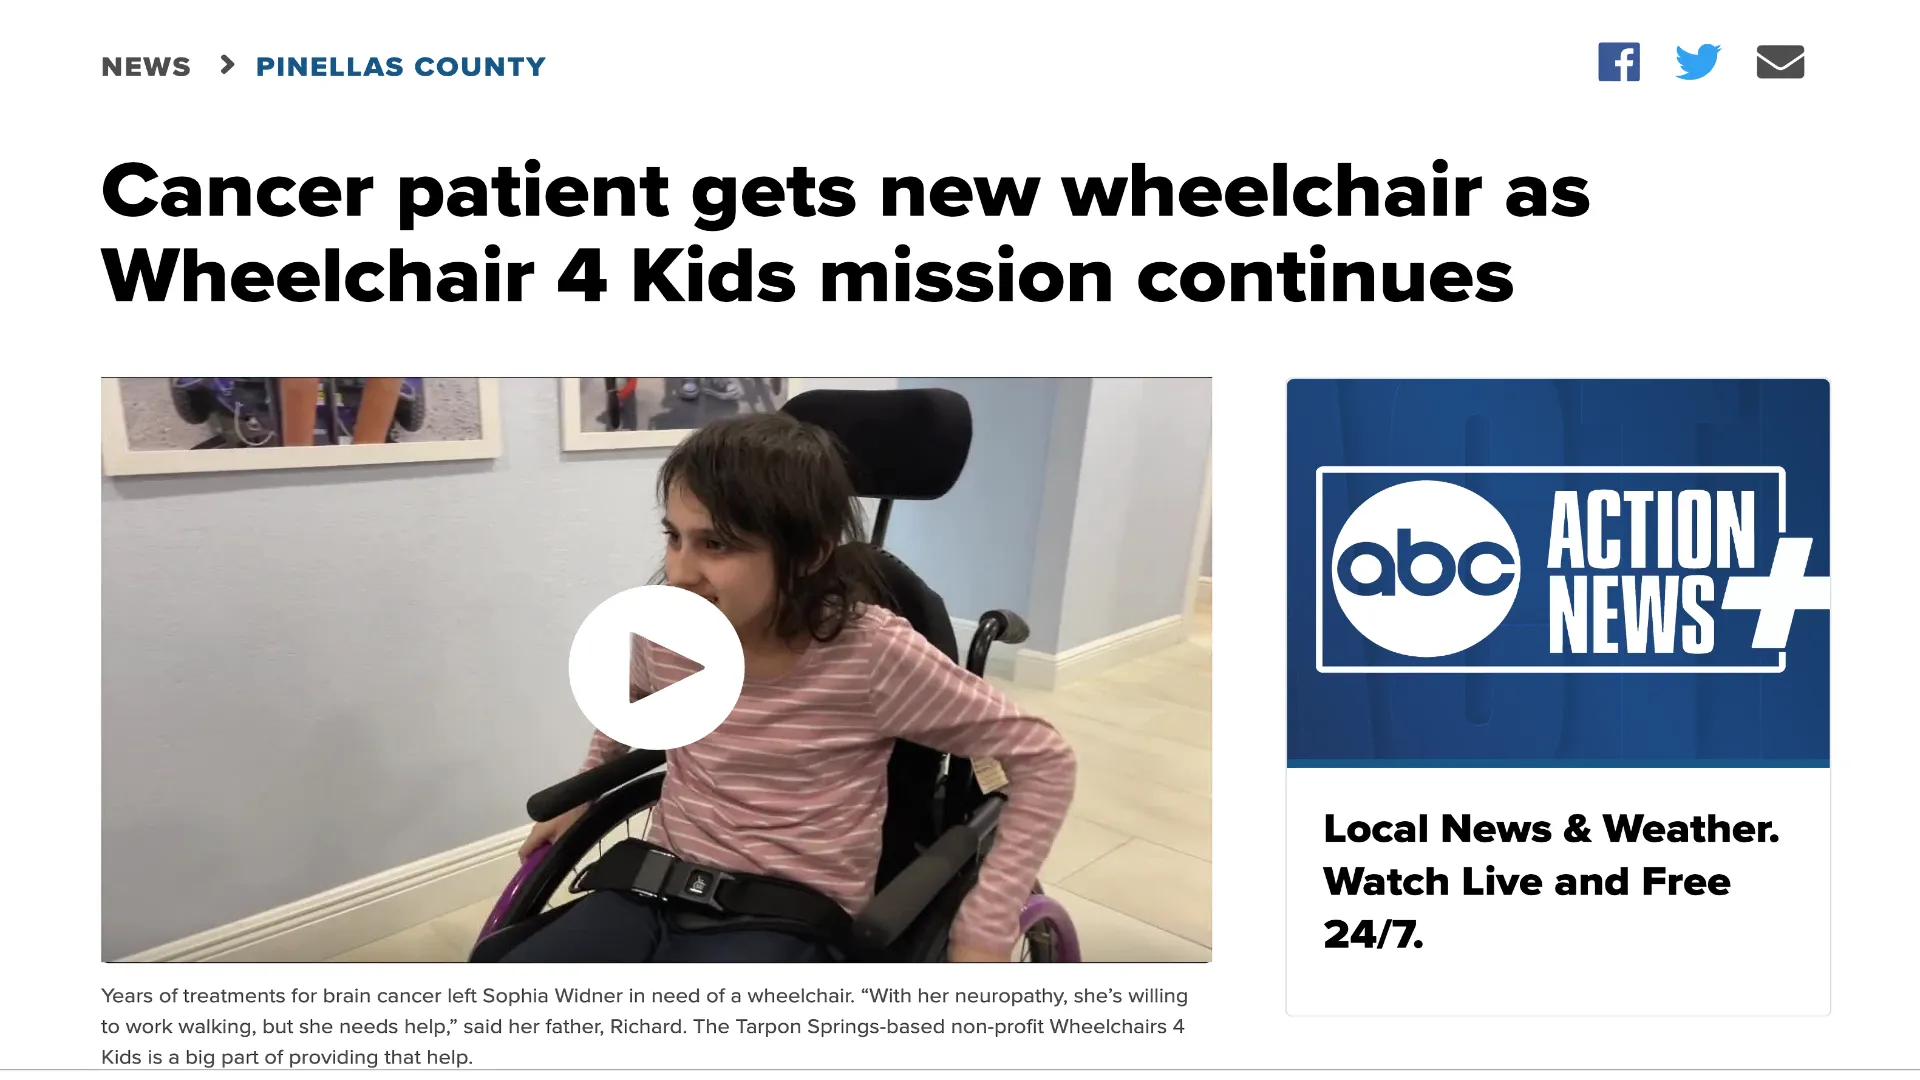 Cancer patient gets new wheelchair as Wheelchair 4 Kids mission continues